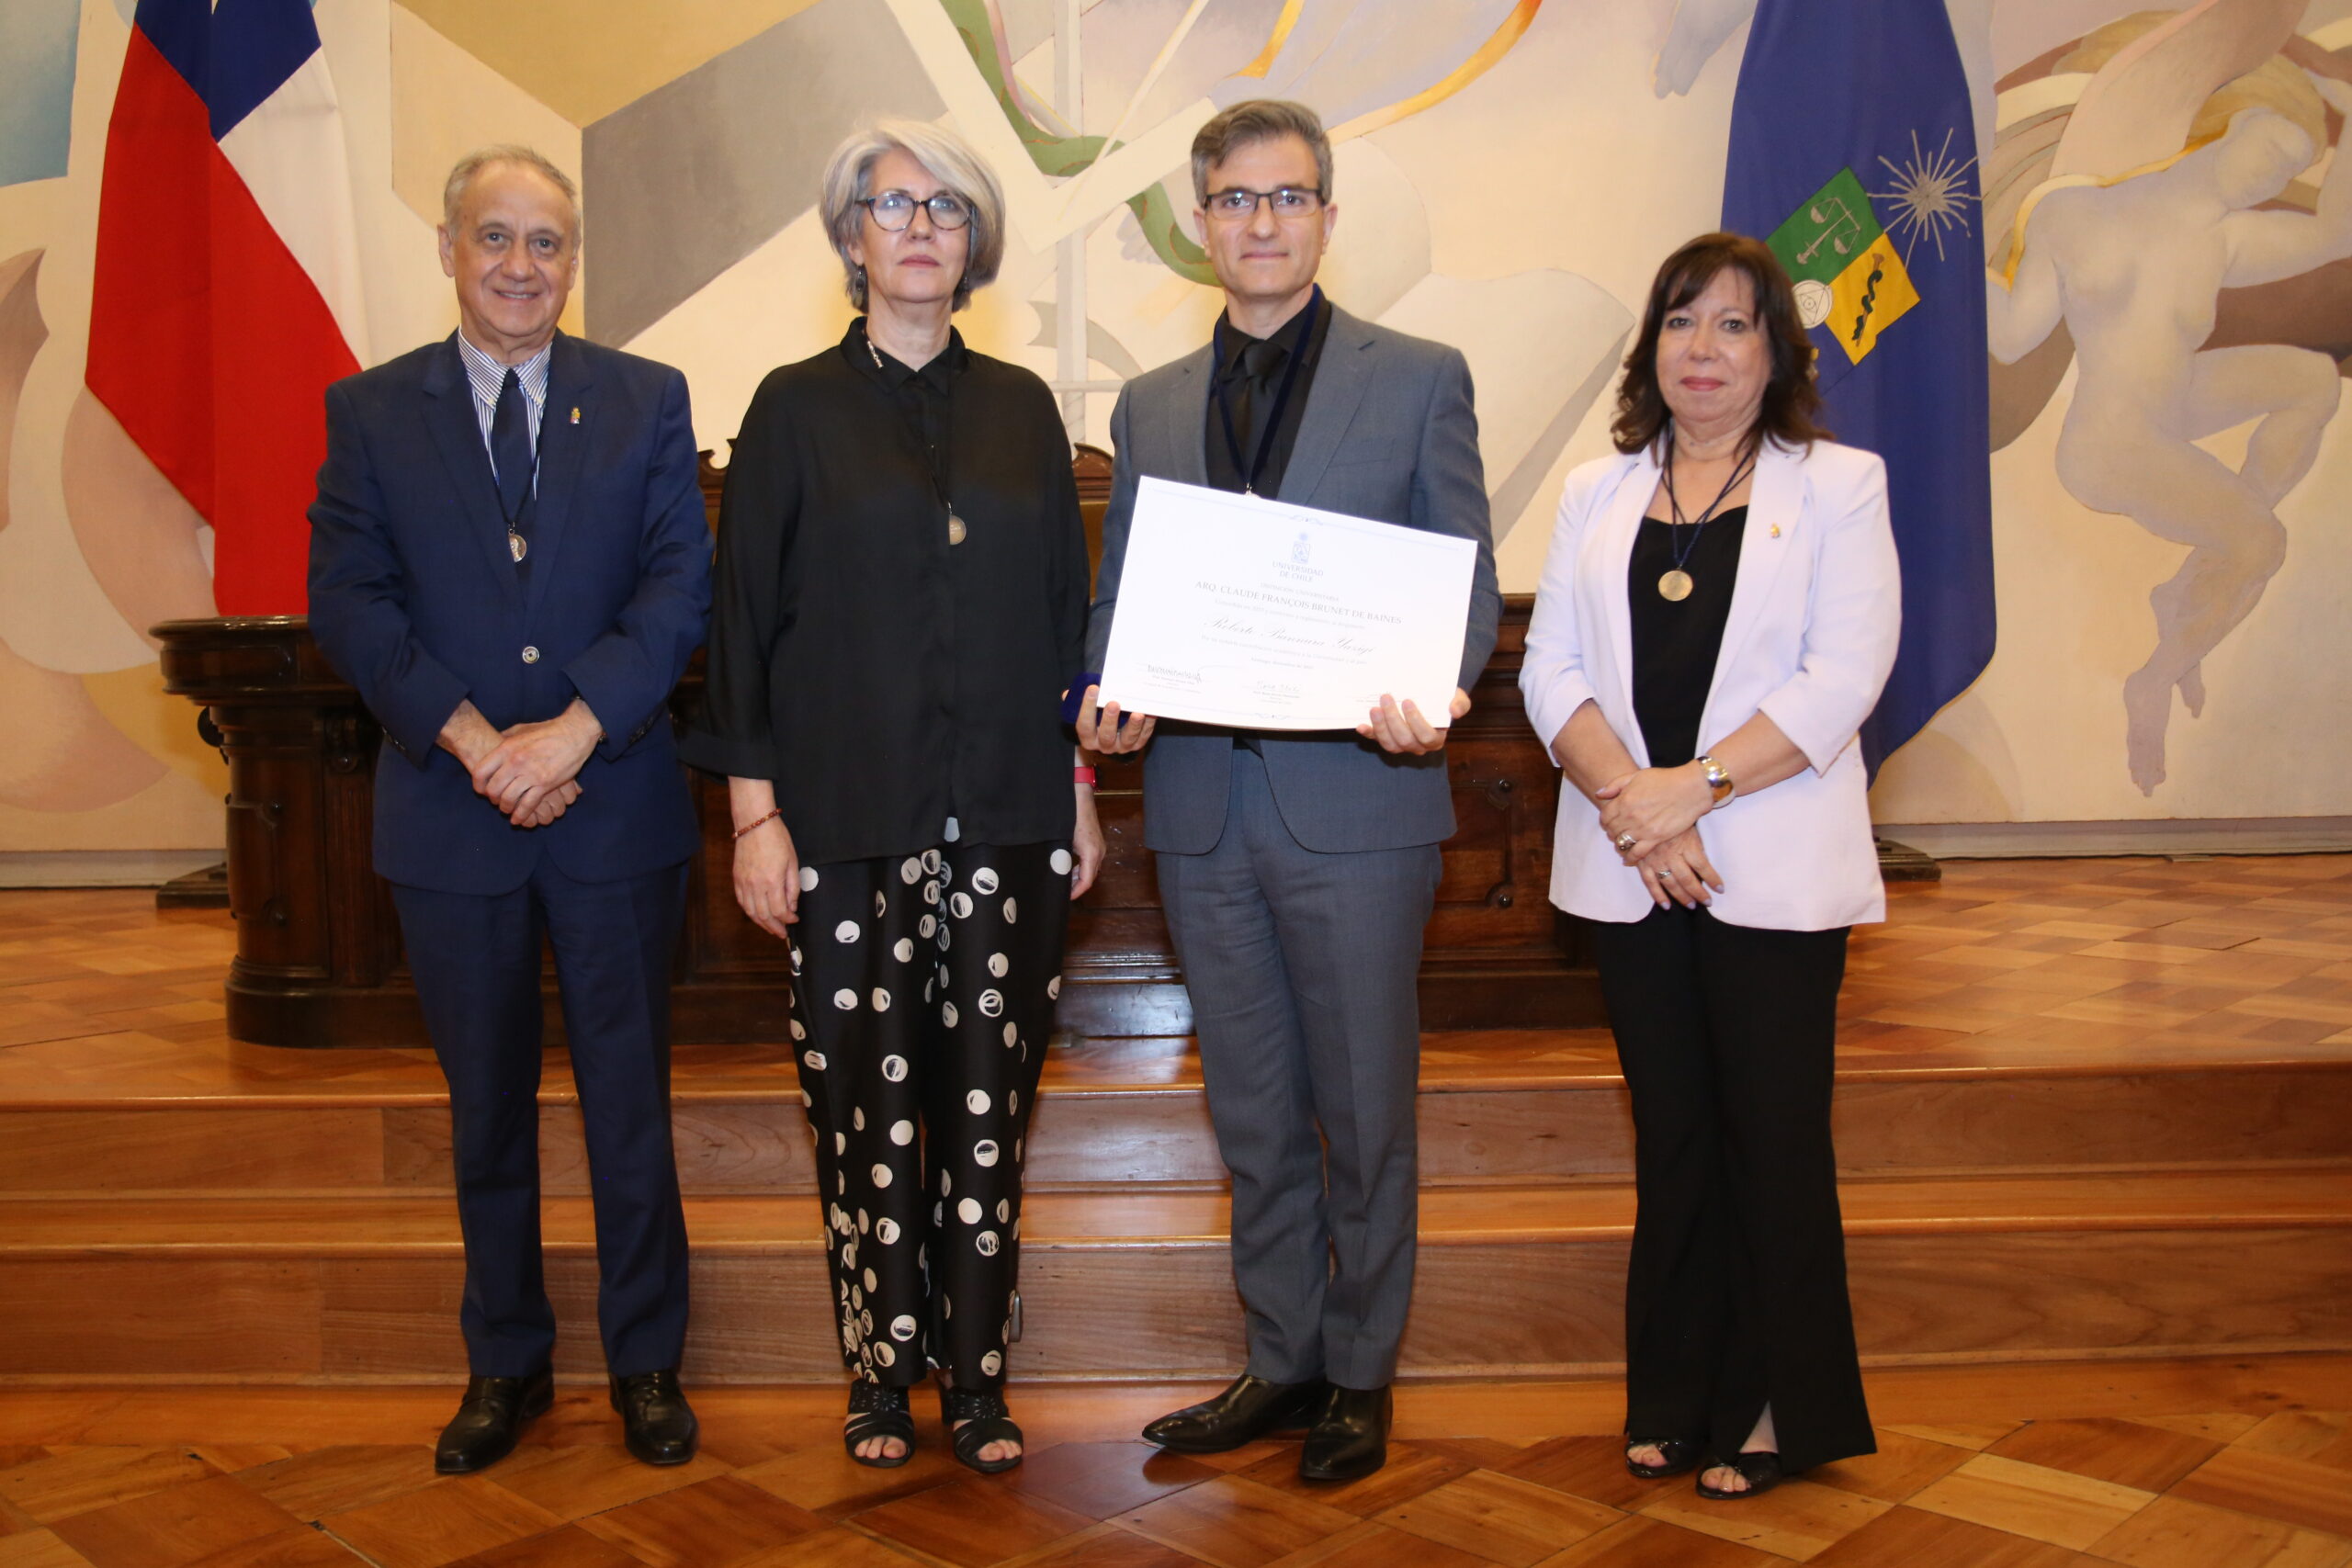 University of Chile Honors Partner Roberto Bannura with Highest Distinction